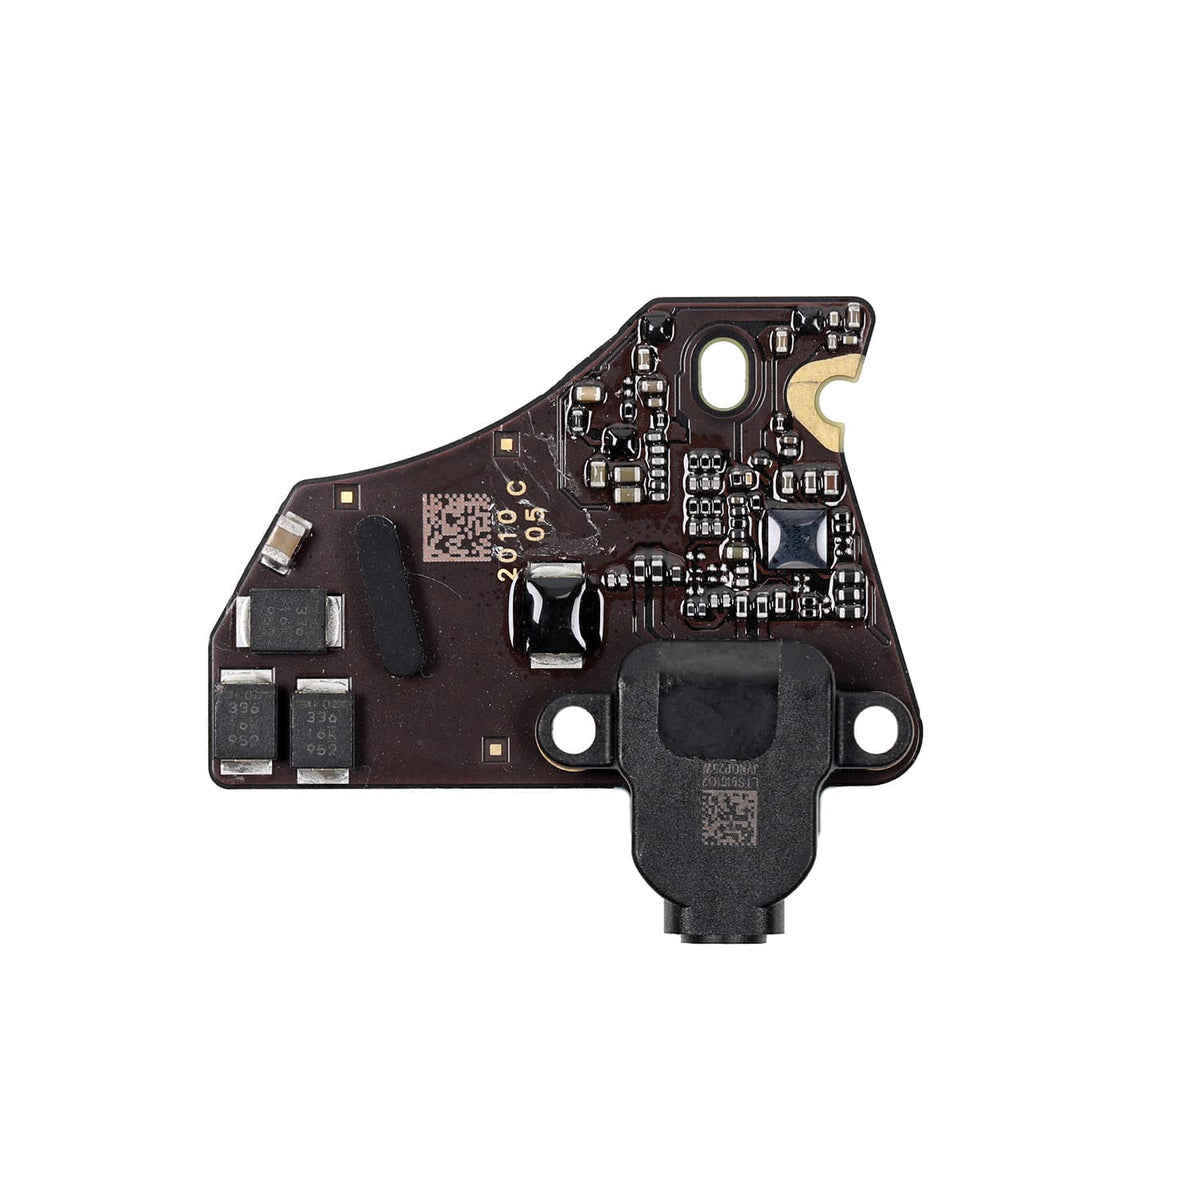 SPACE GRAY AUDIO BOARD FOR MACBOOK AIR 13" A2179 (EARLY 2020)